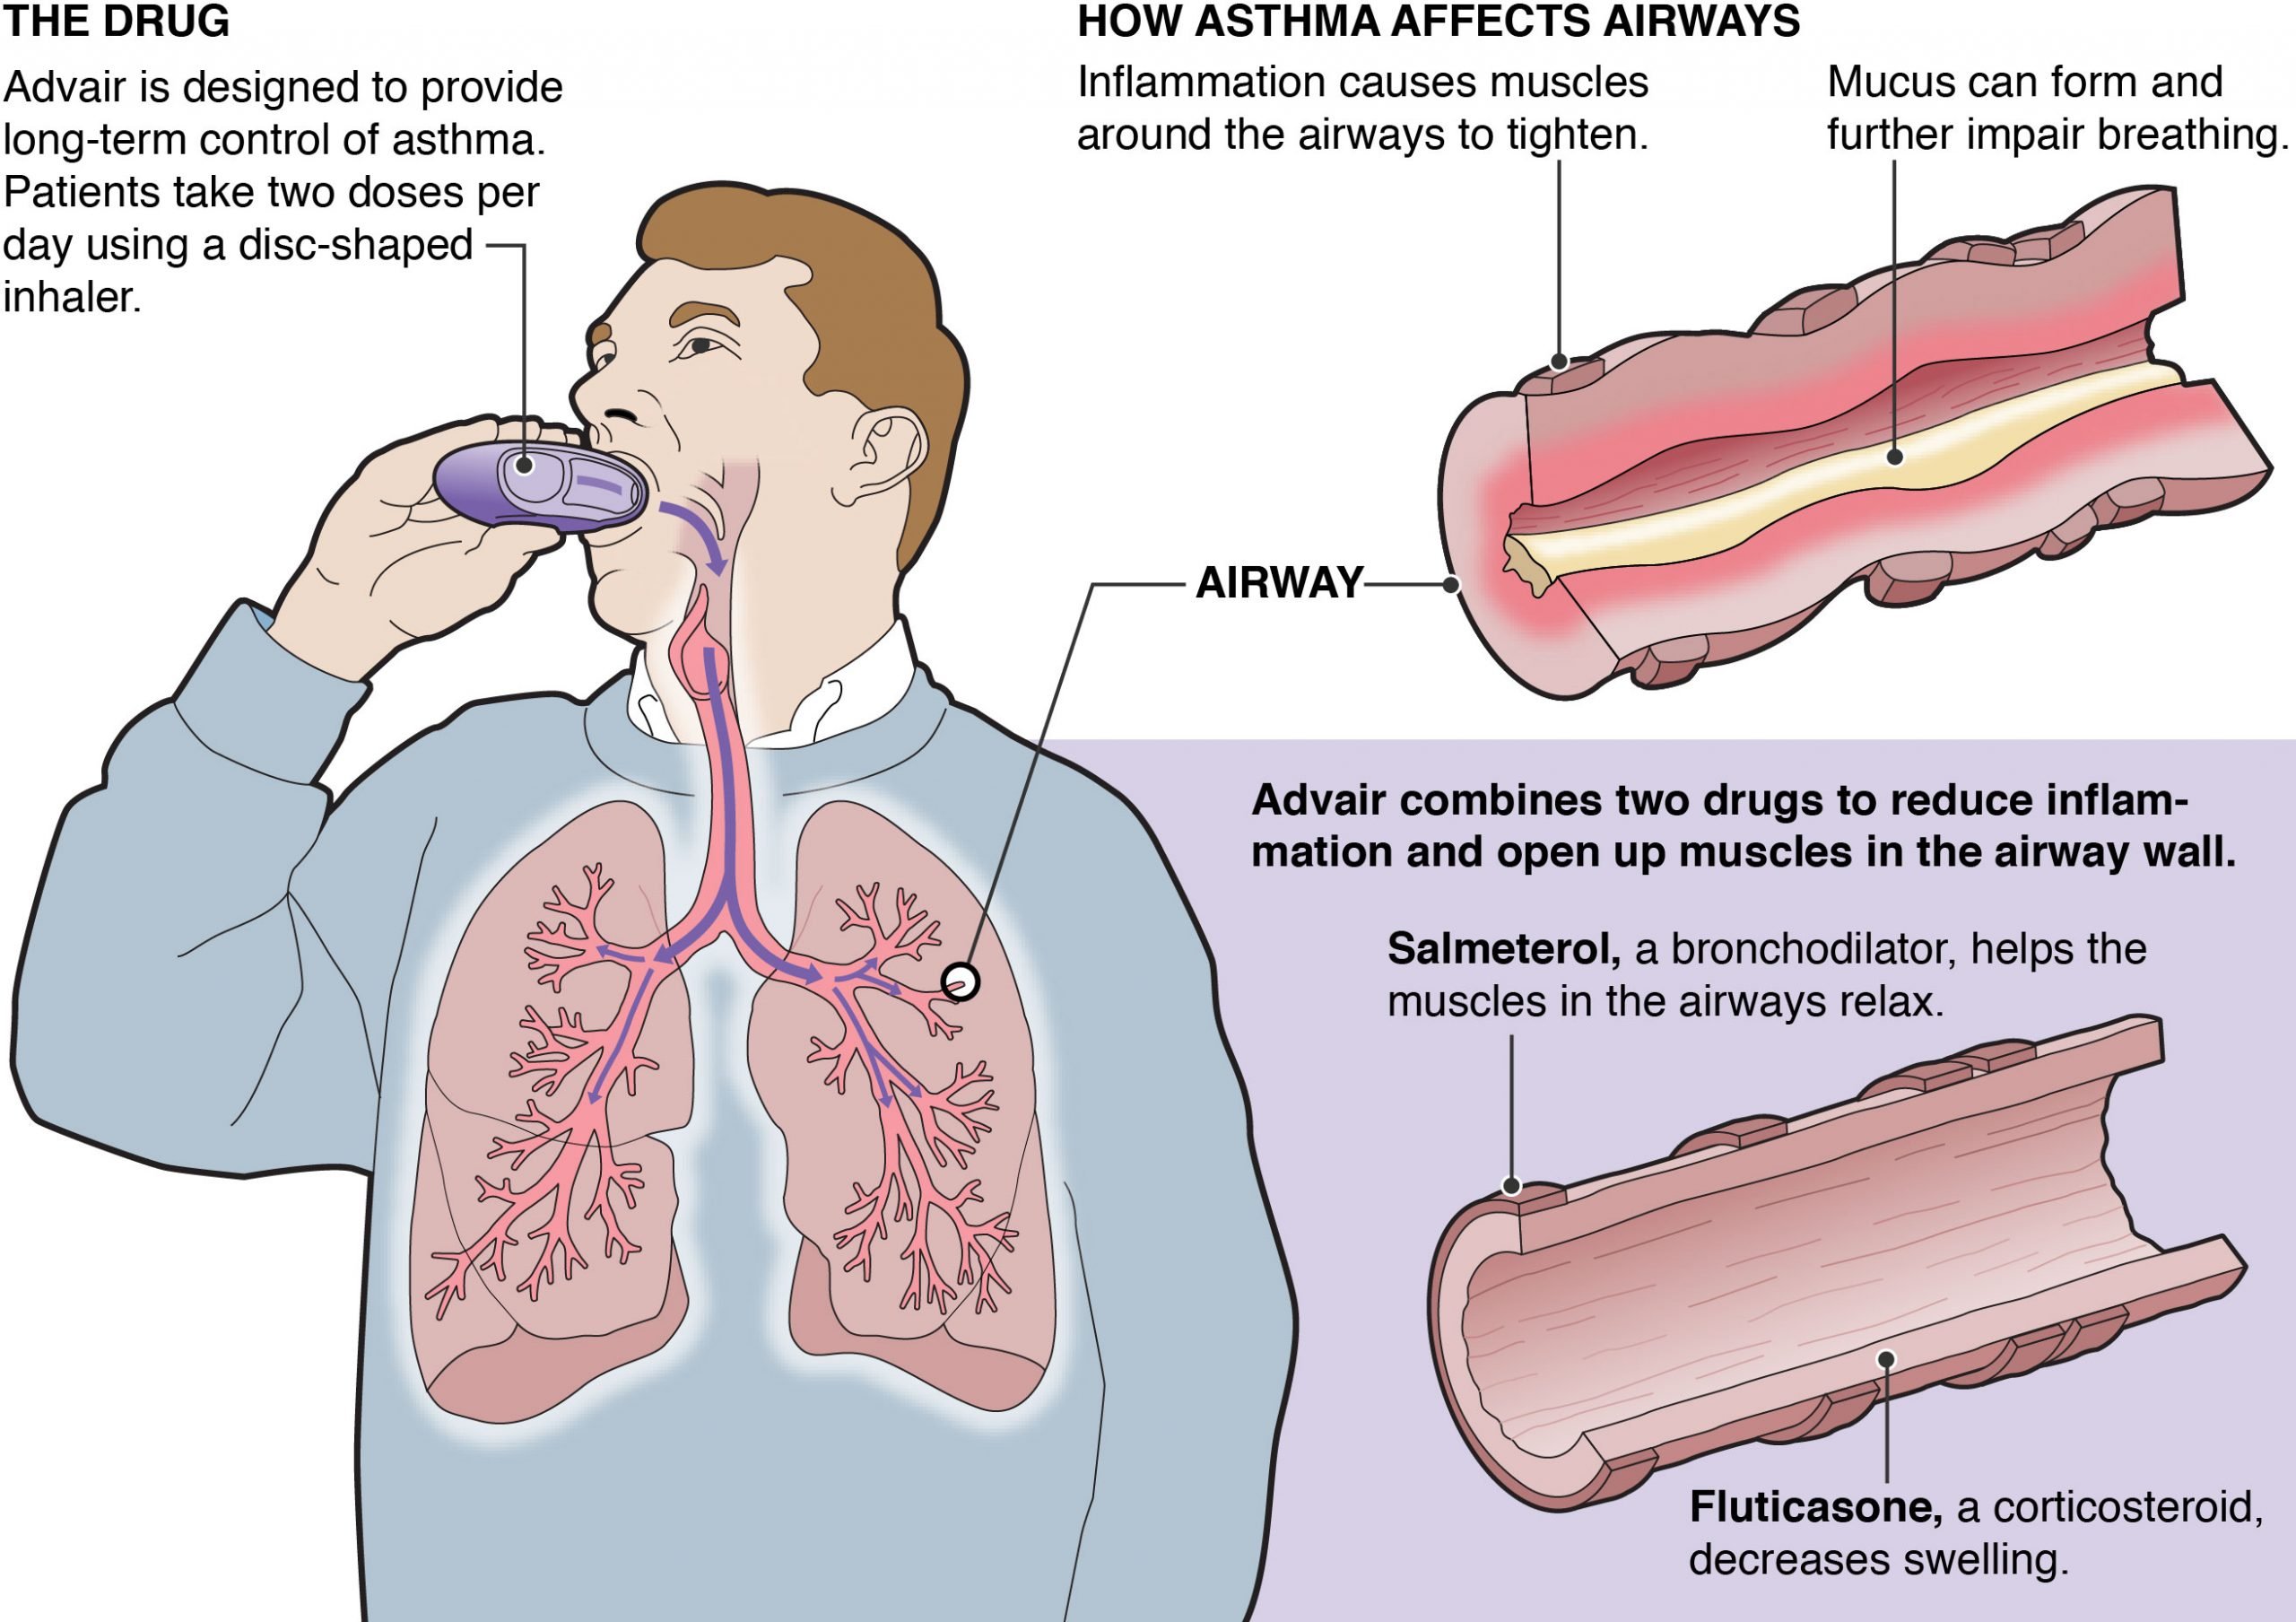 Can Asthma Cause Death